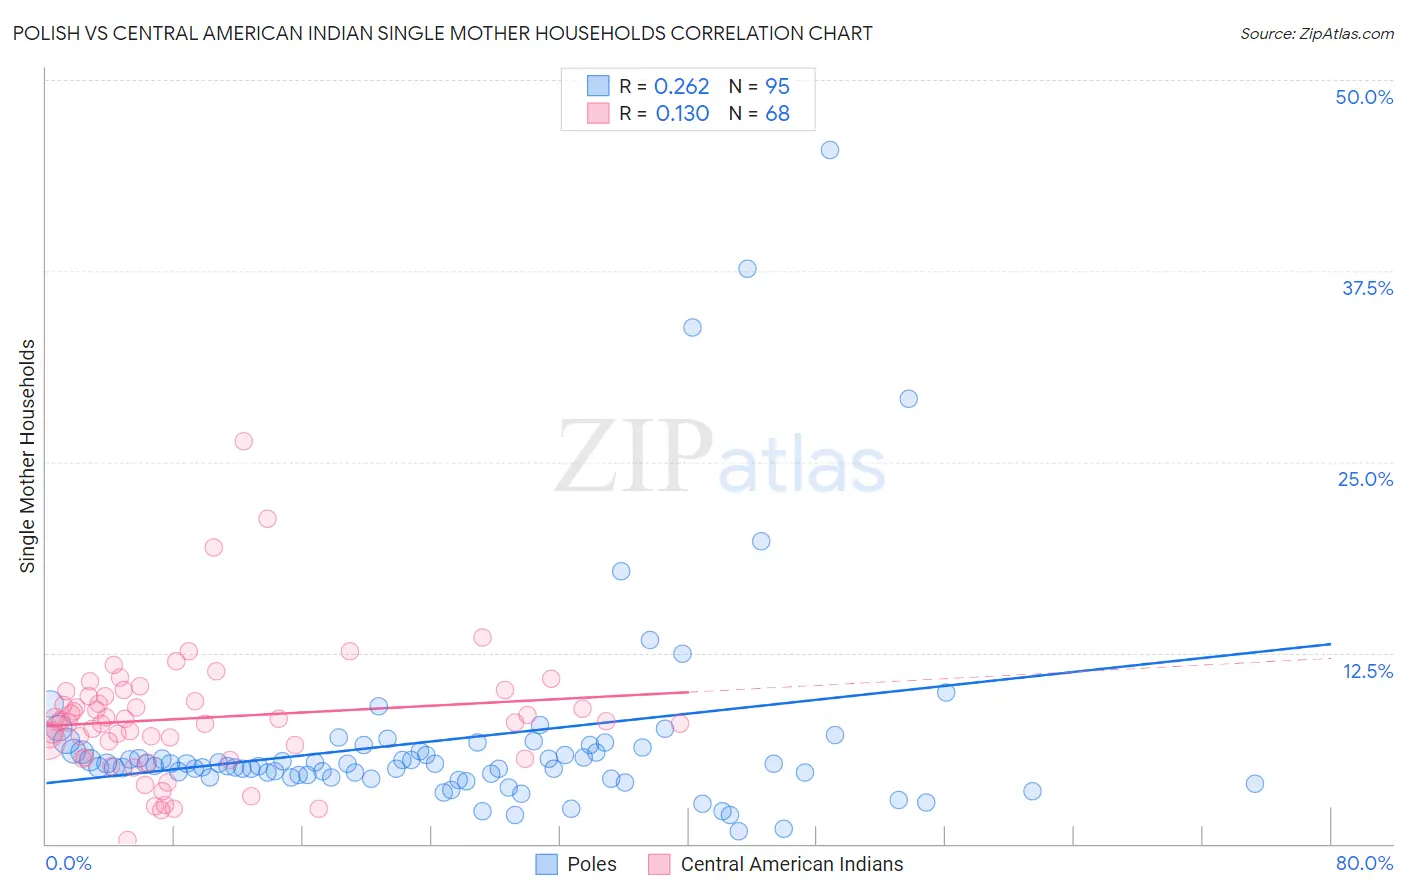 Polish vs Central American Indian Single Mother Households